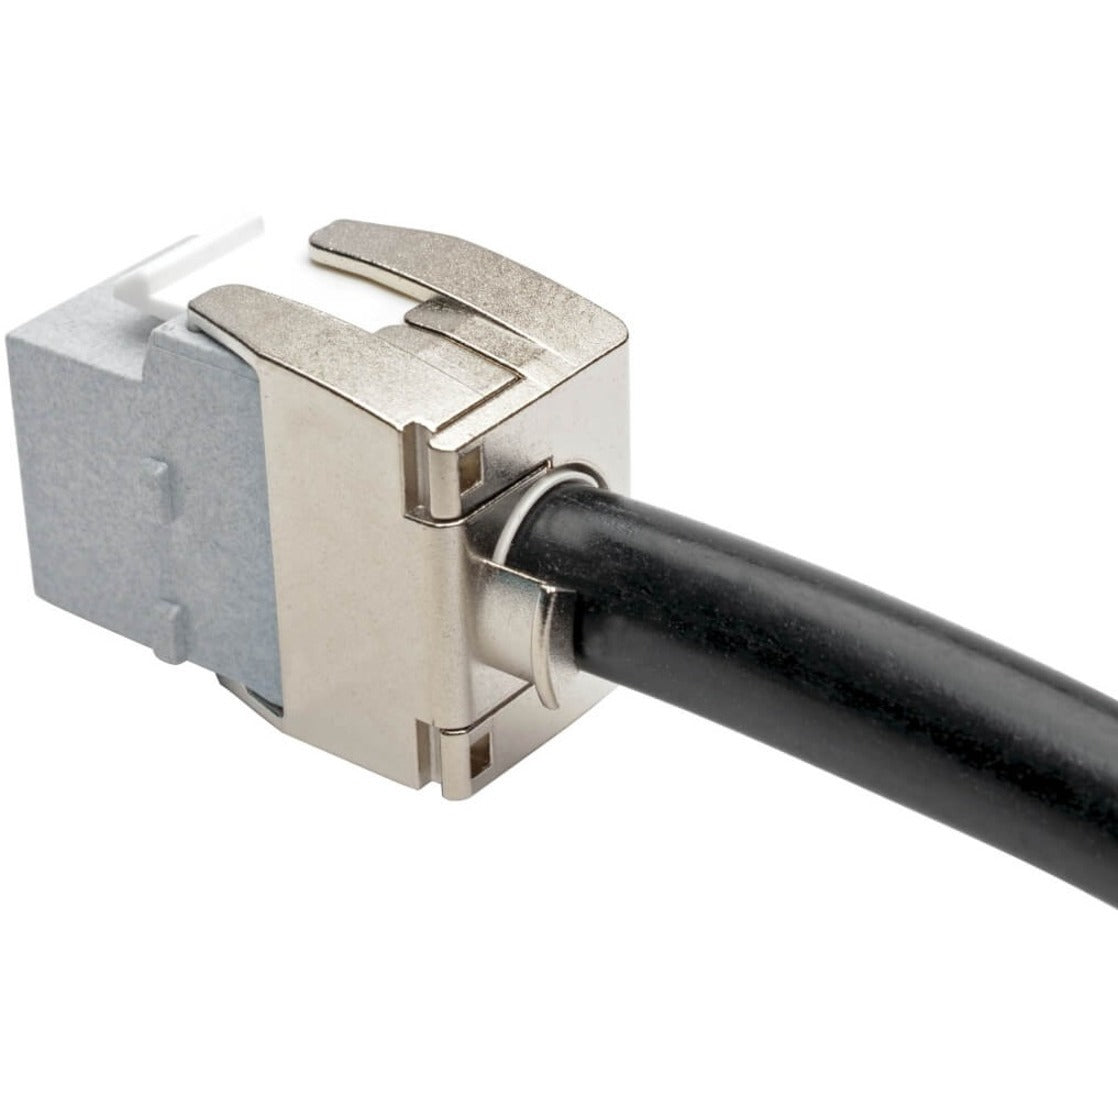 Tripp Lite by Eaton N238-001-GY-TFA Toolless Cat6a Keystone Jack - Gray, Network Connector